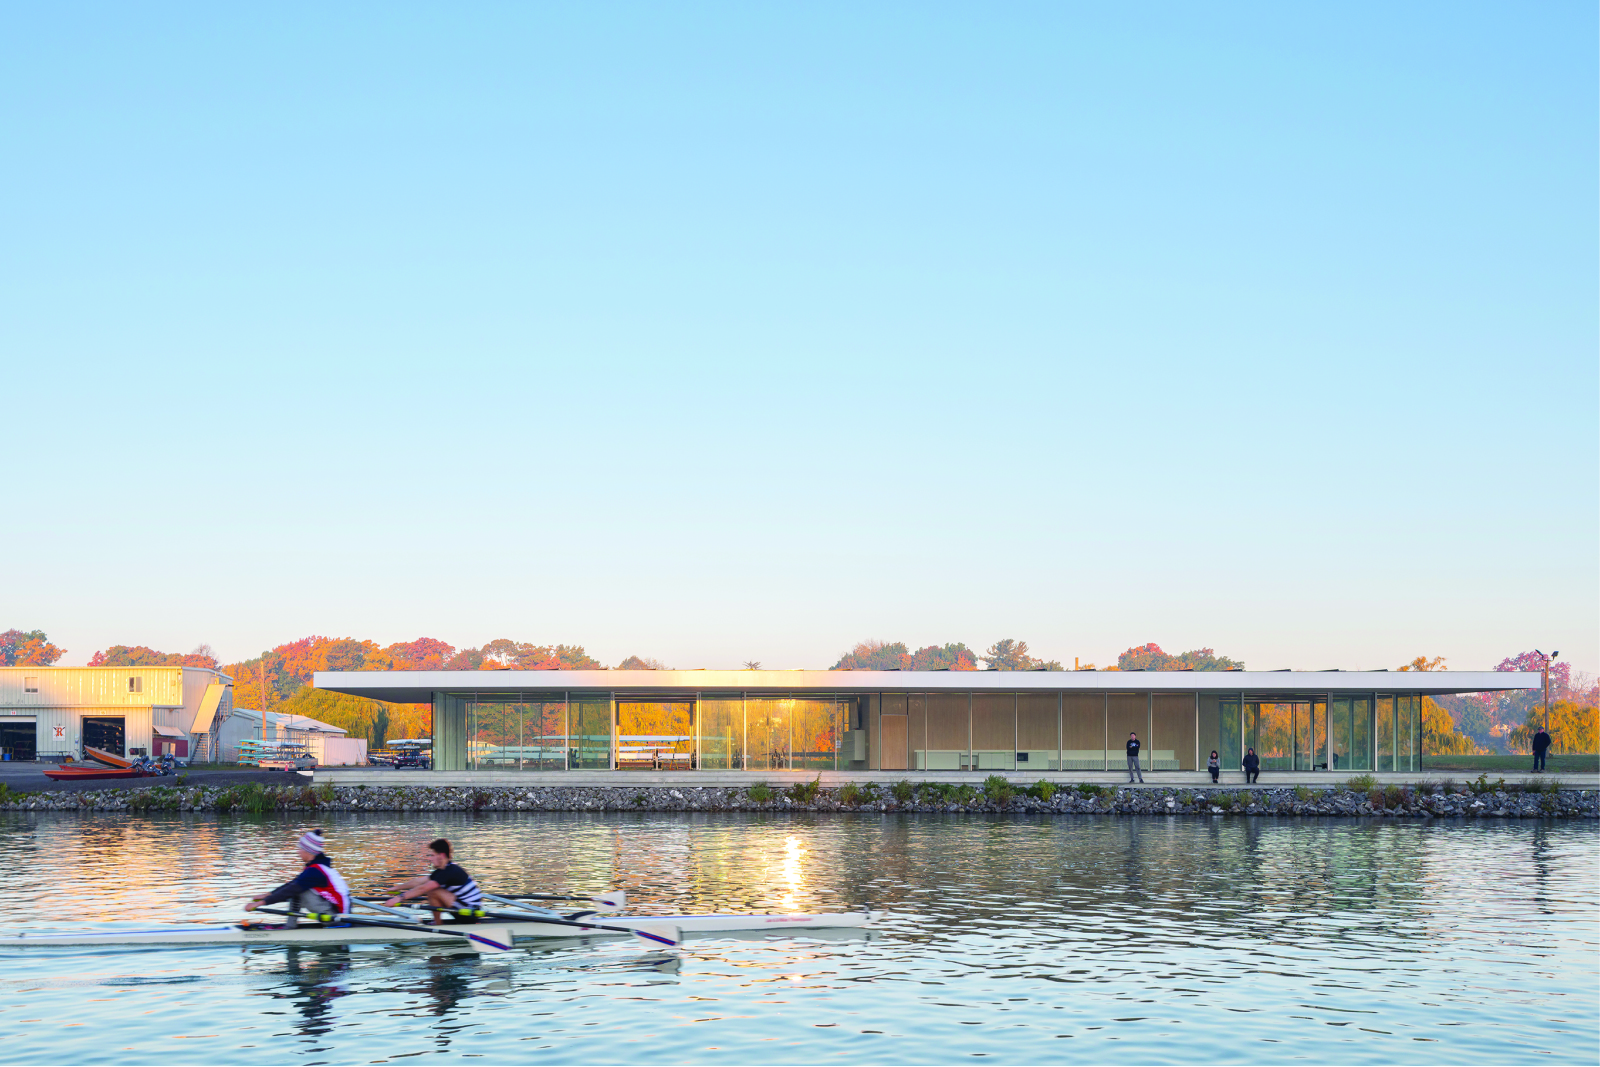 Exterior view of the Neil Campbell Rowing Centre